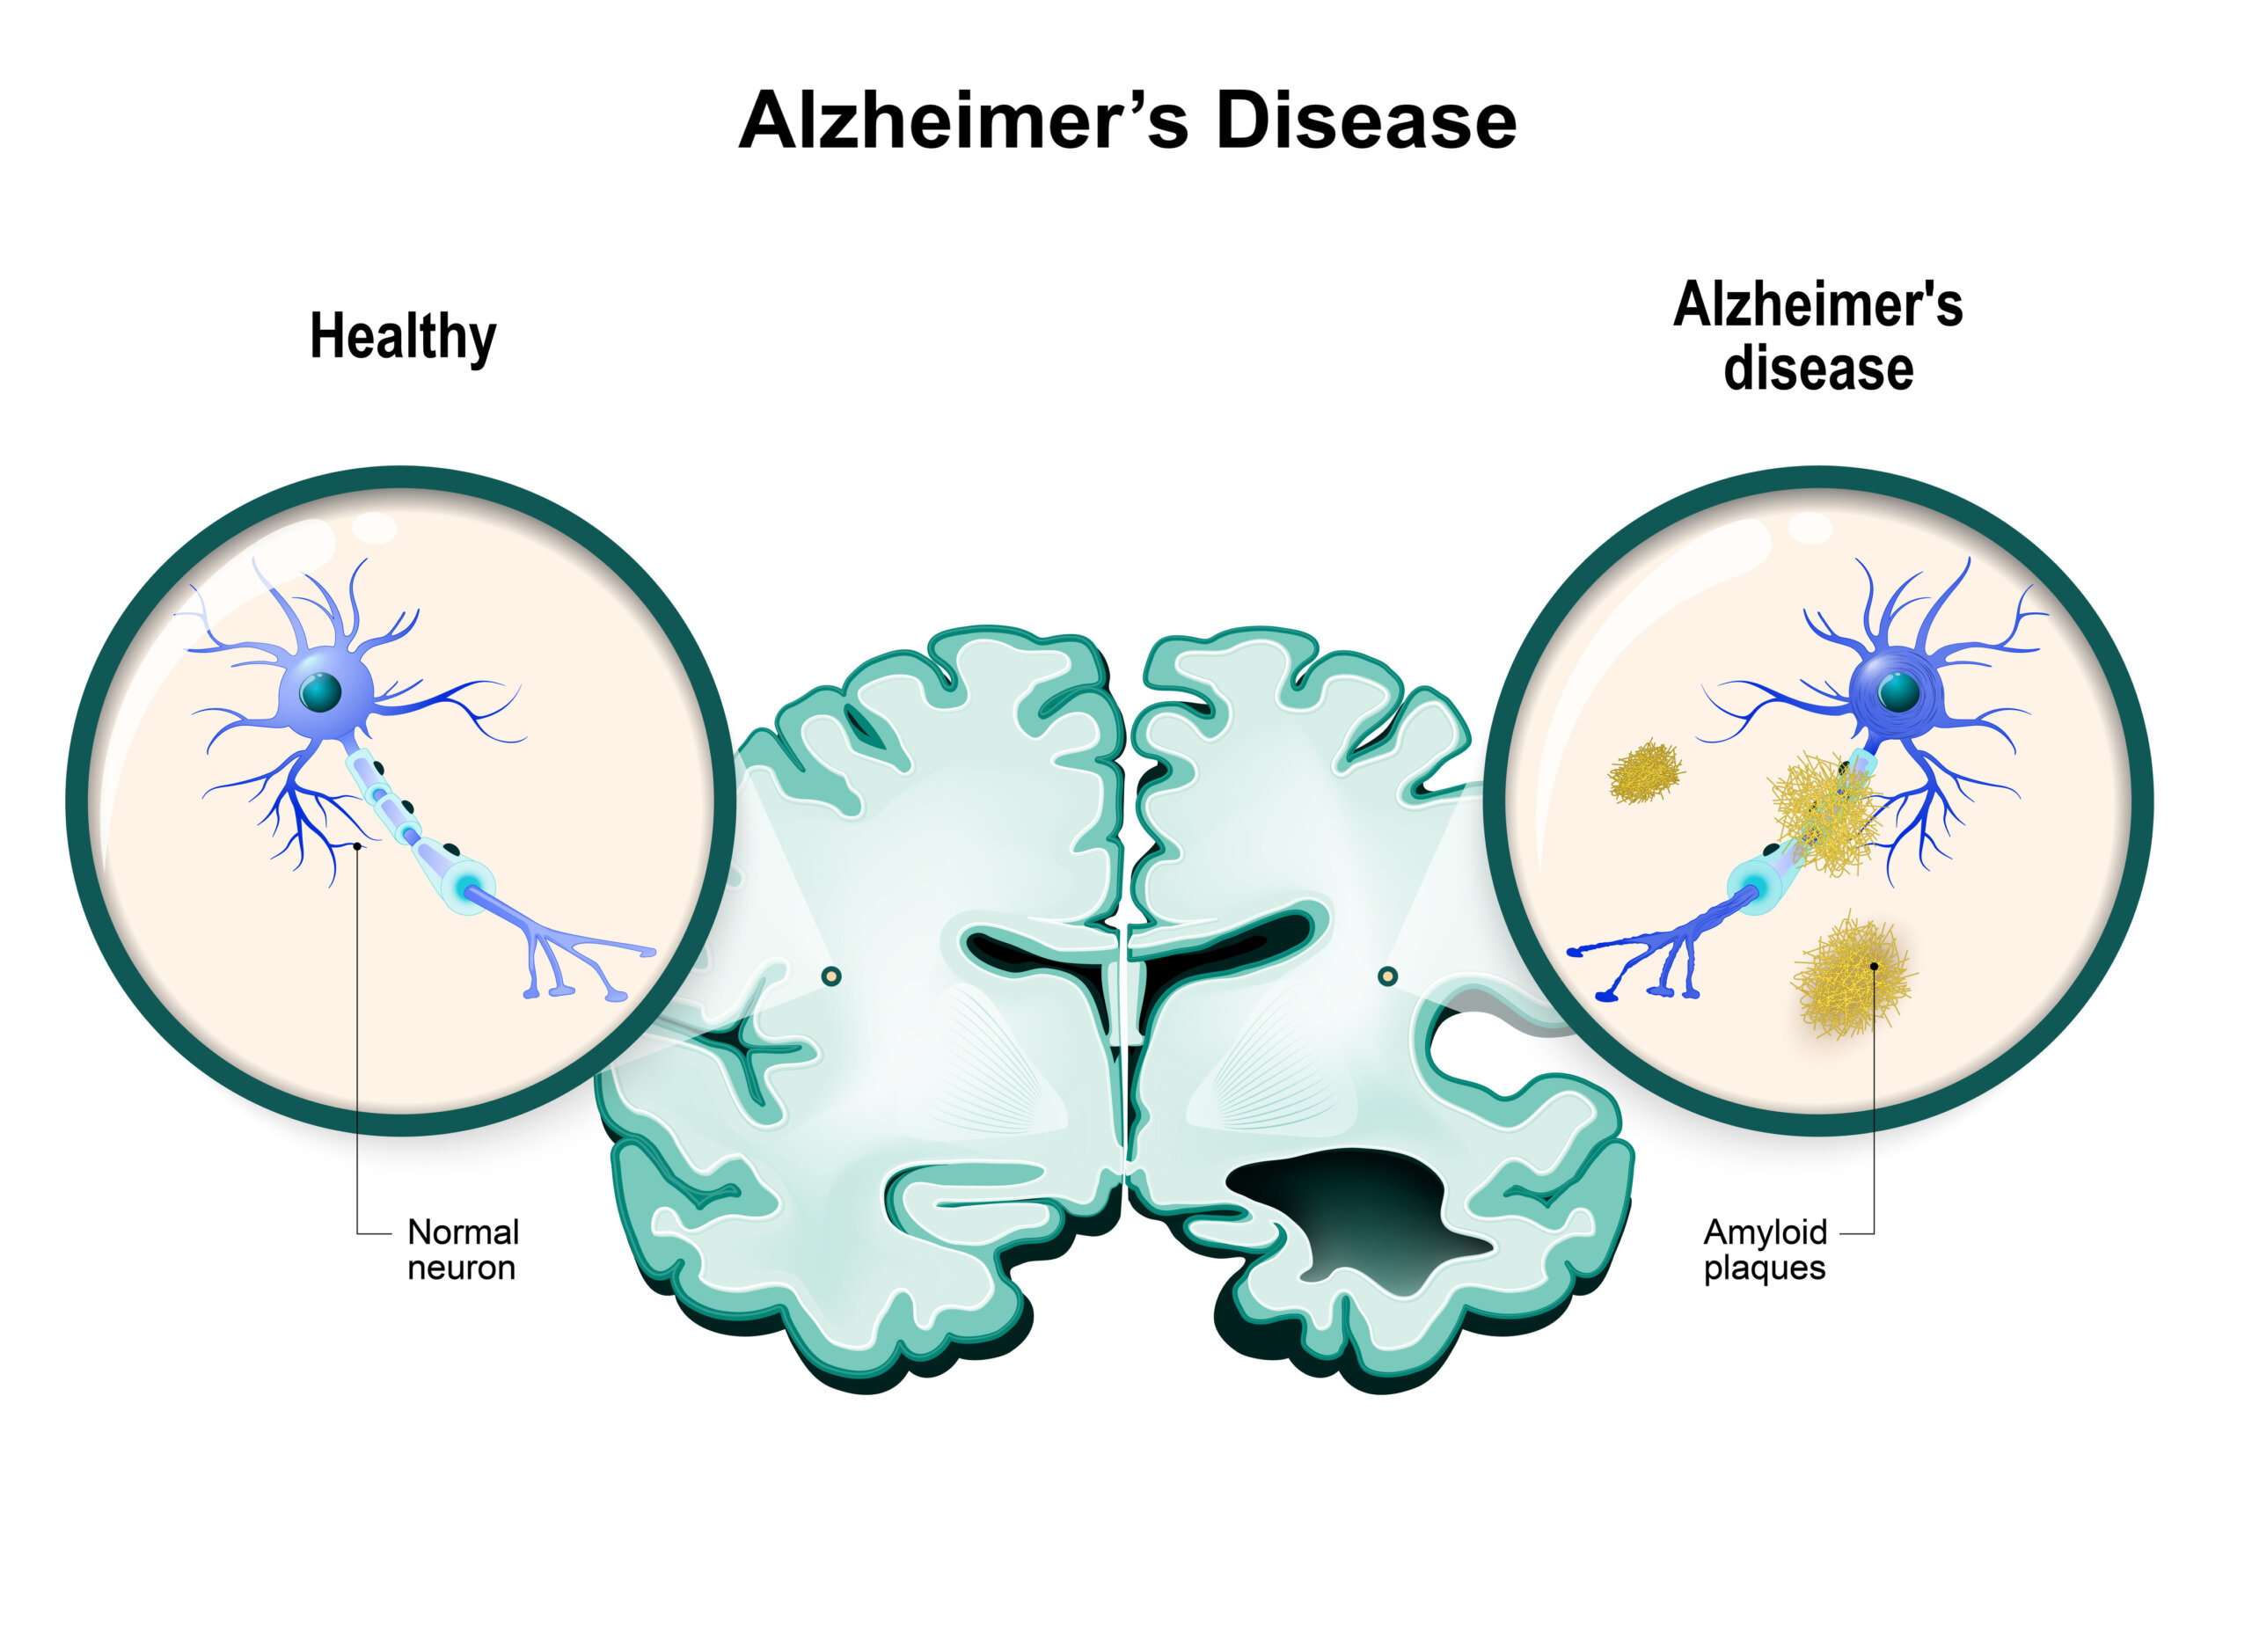 Illustration comparing a healthy human brain and a brain with Alzheimer's disease. Shows a healthy neuron and neuron with amyloid plaques.